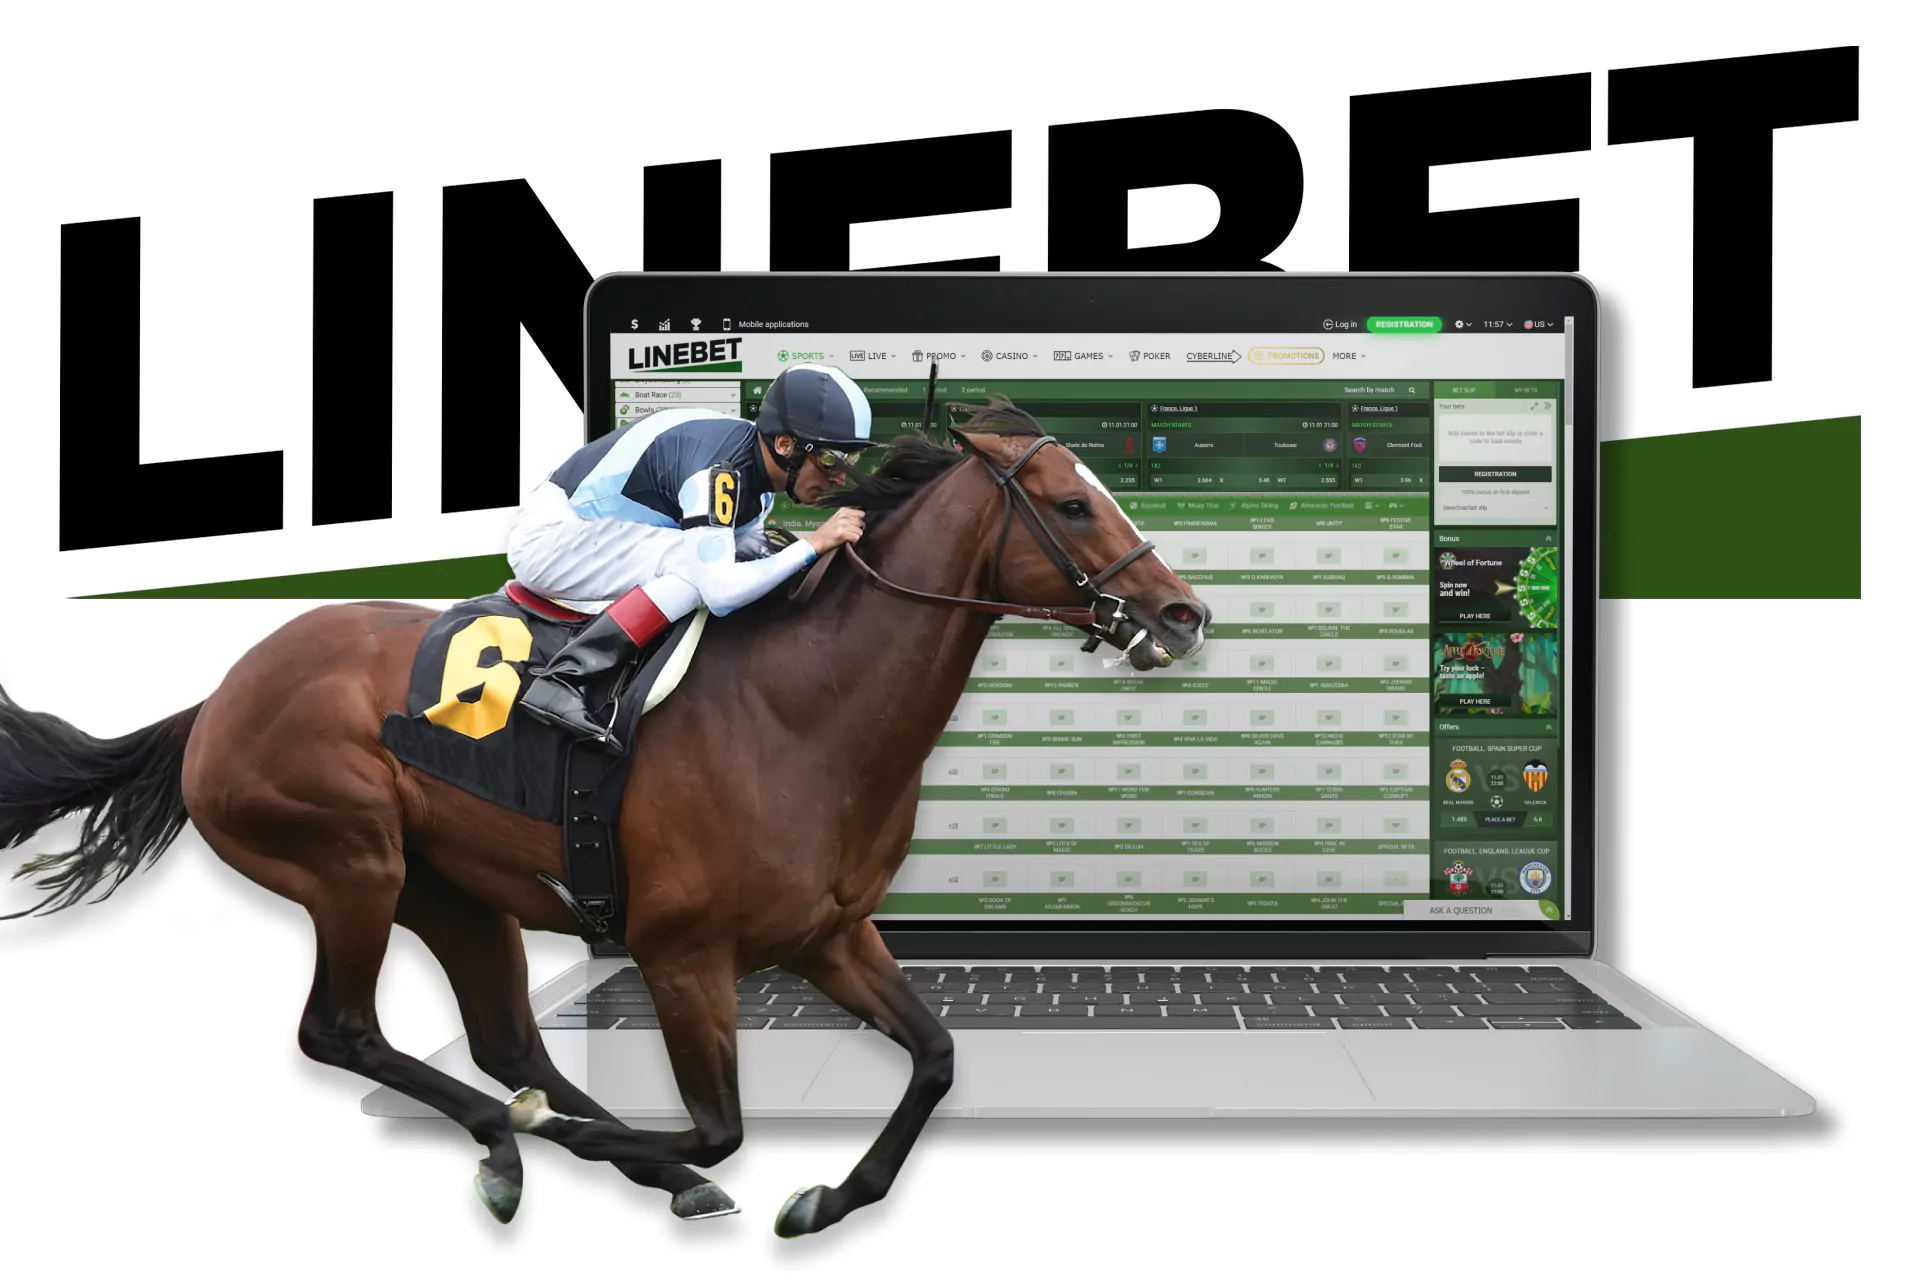 Learn how to choose the best horse to make a profitable bet on horse racing on Linebet.